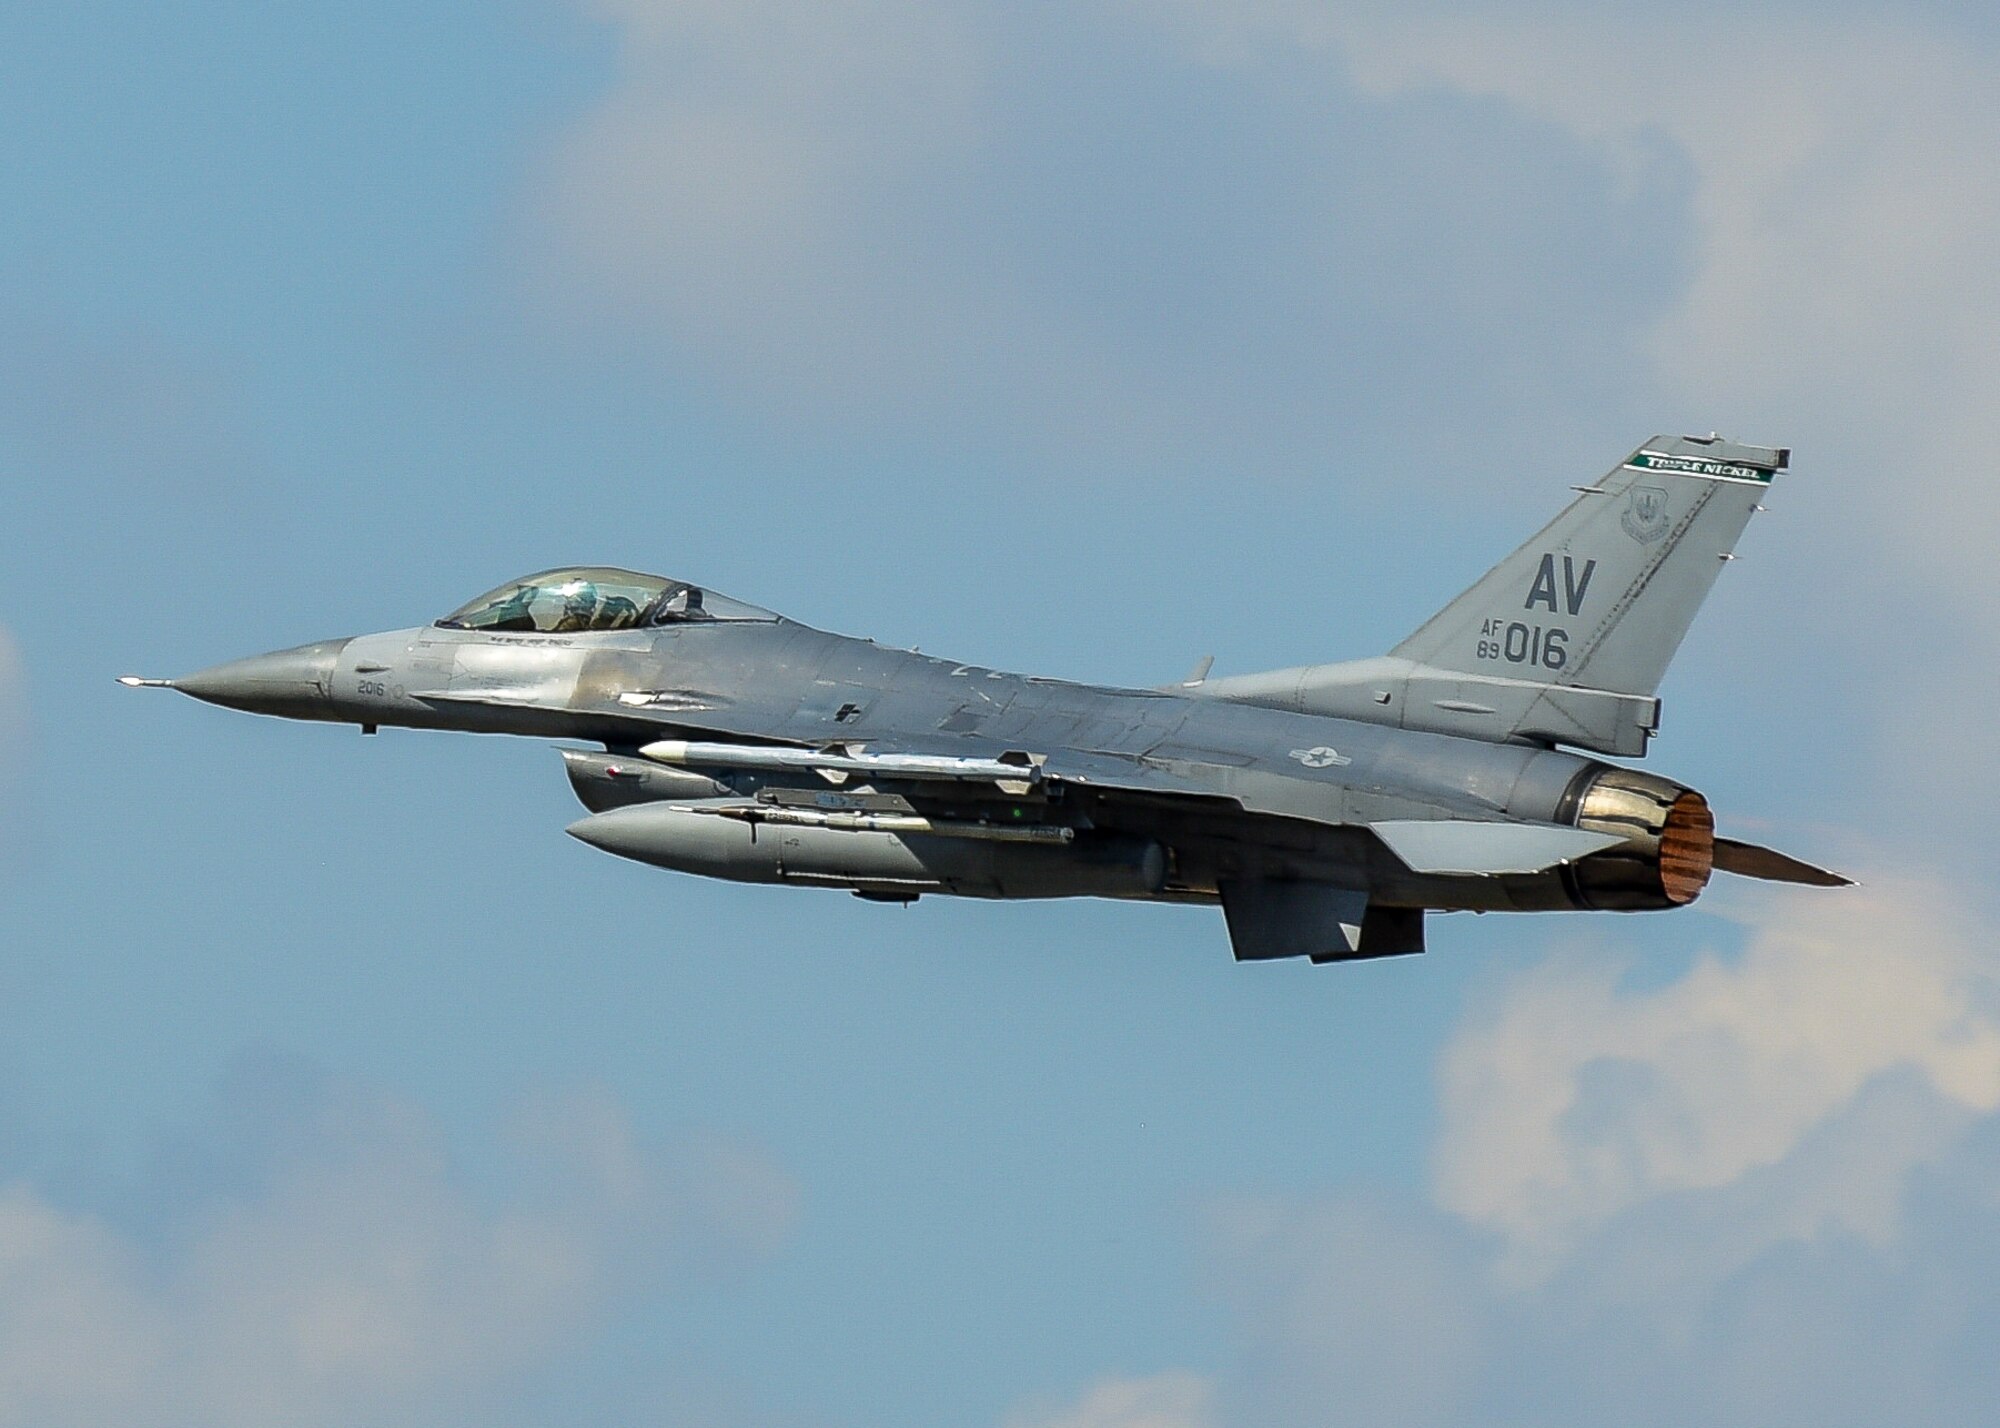 A U.S. Air Force F-16C Fighting Falcon assigned to the 555th Fighter Squadron from the 31st Fighter Wing, Aviano Air Base, Italy, takes off